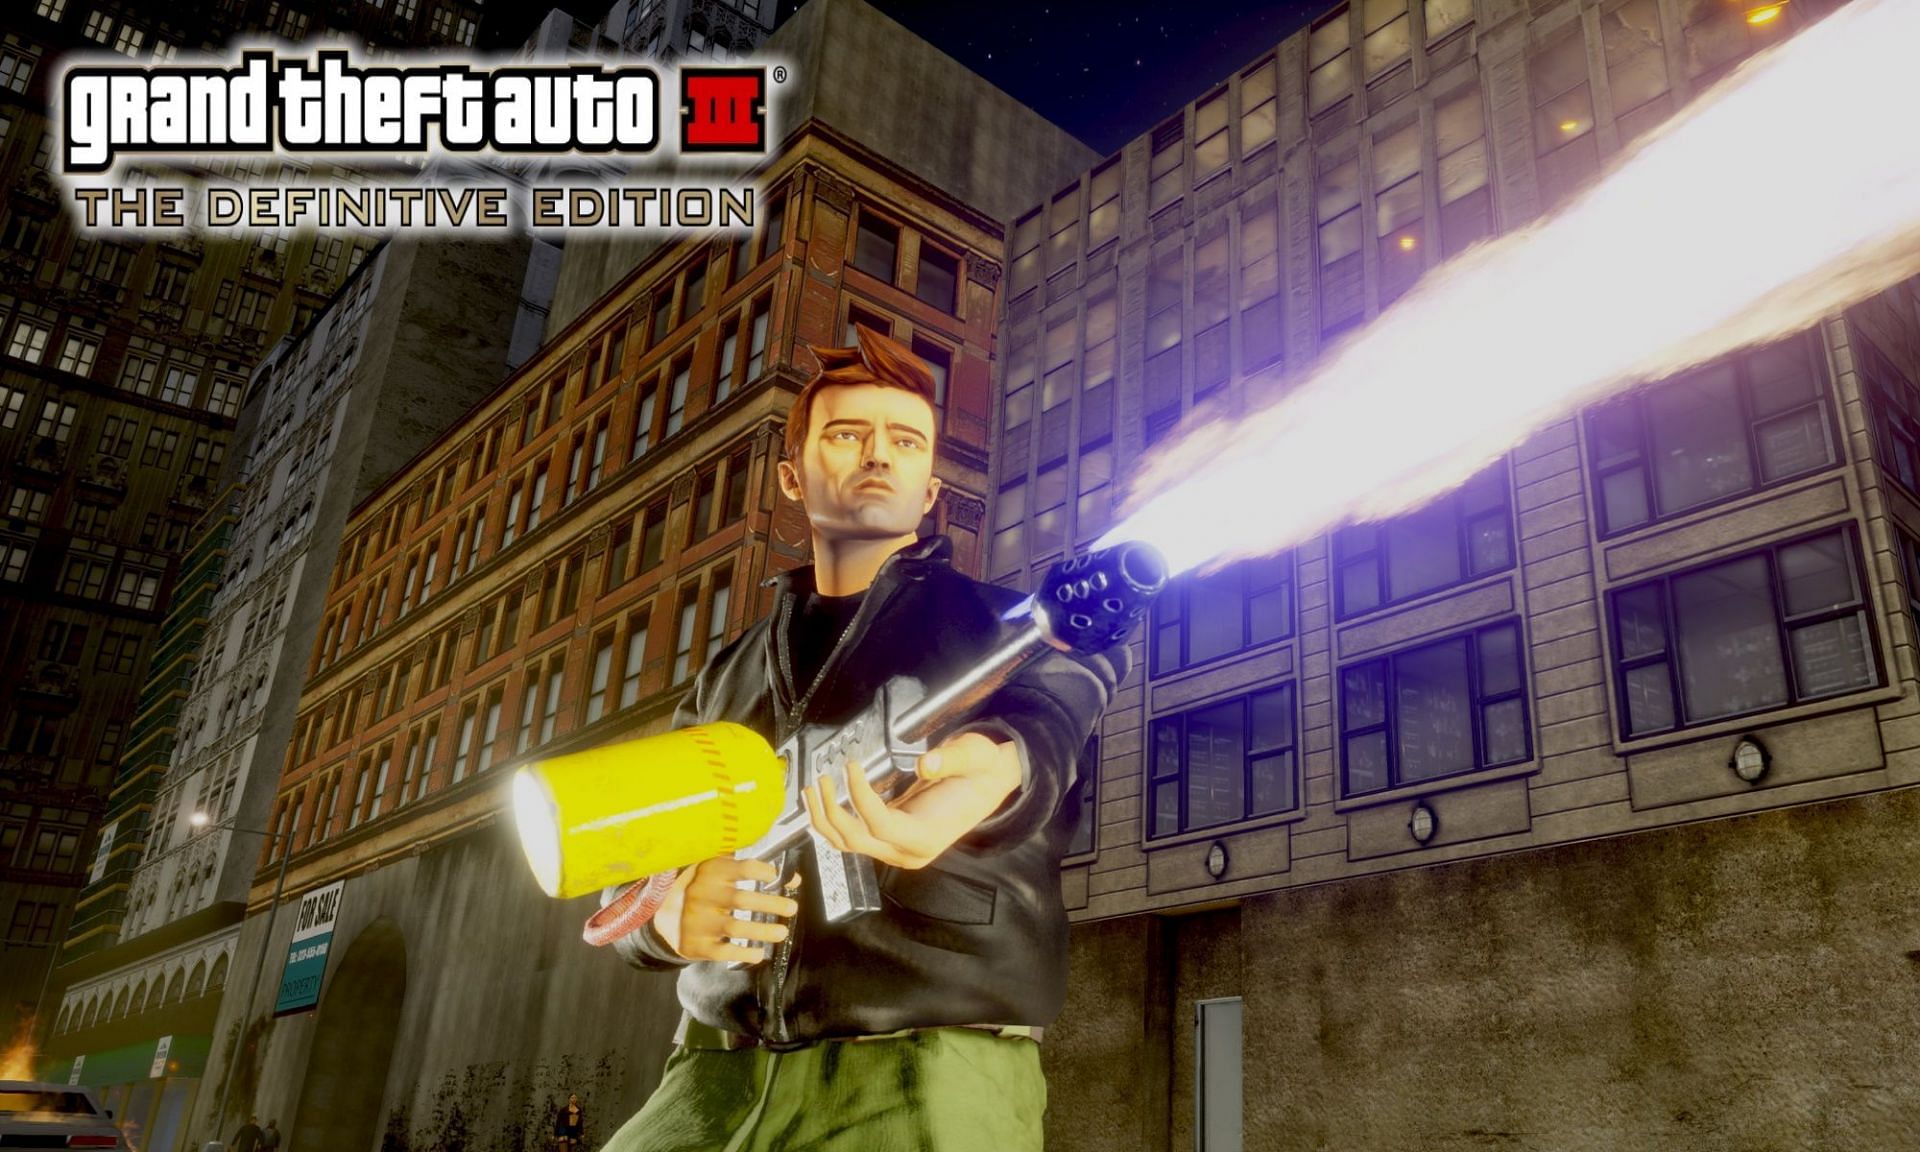 The best weapons in GTA 3 - Rocket launcher, Uzi, and more